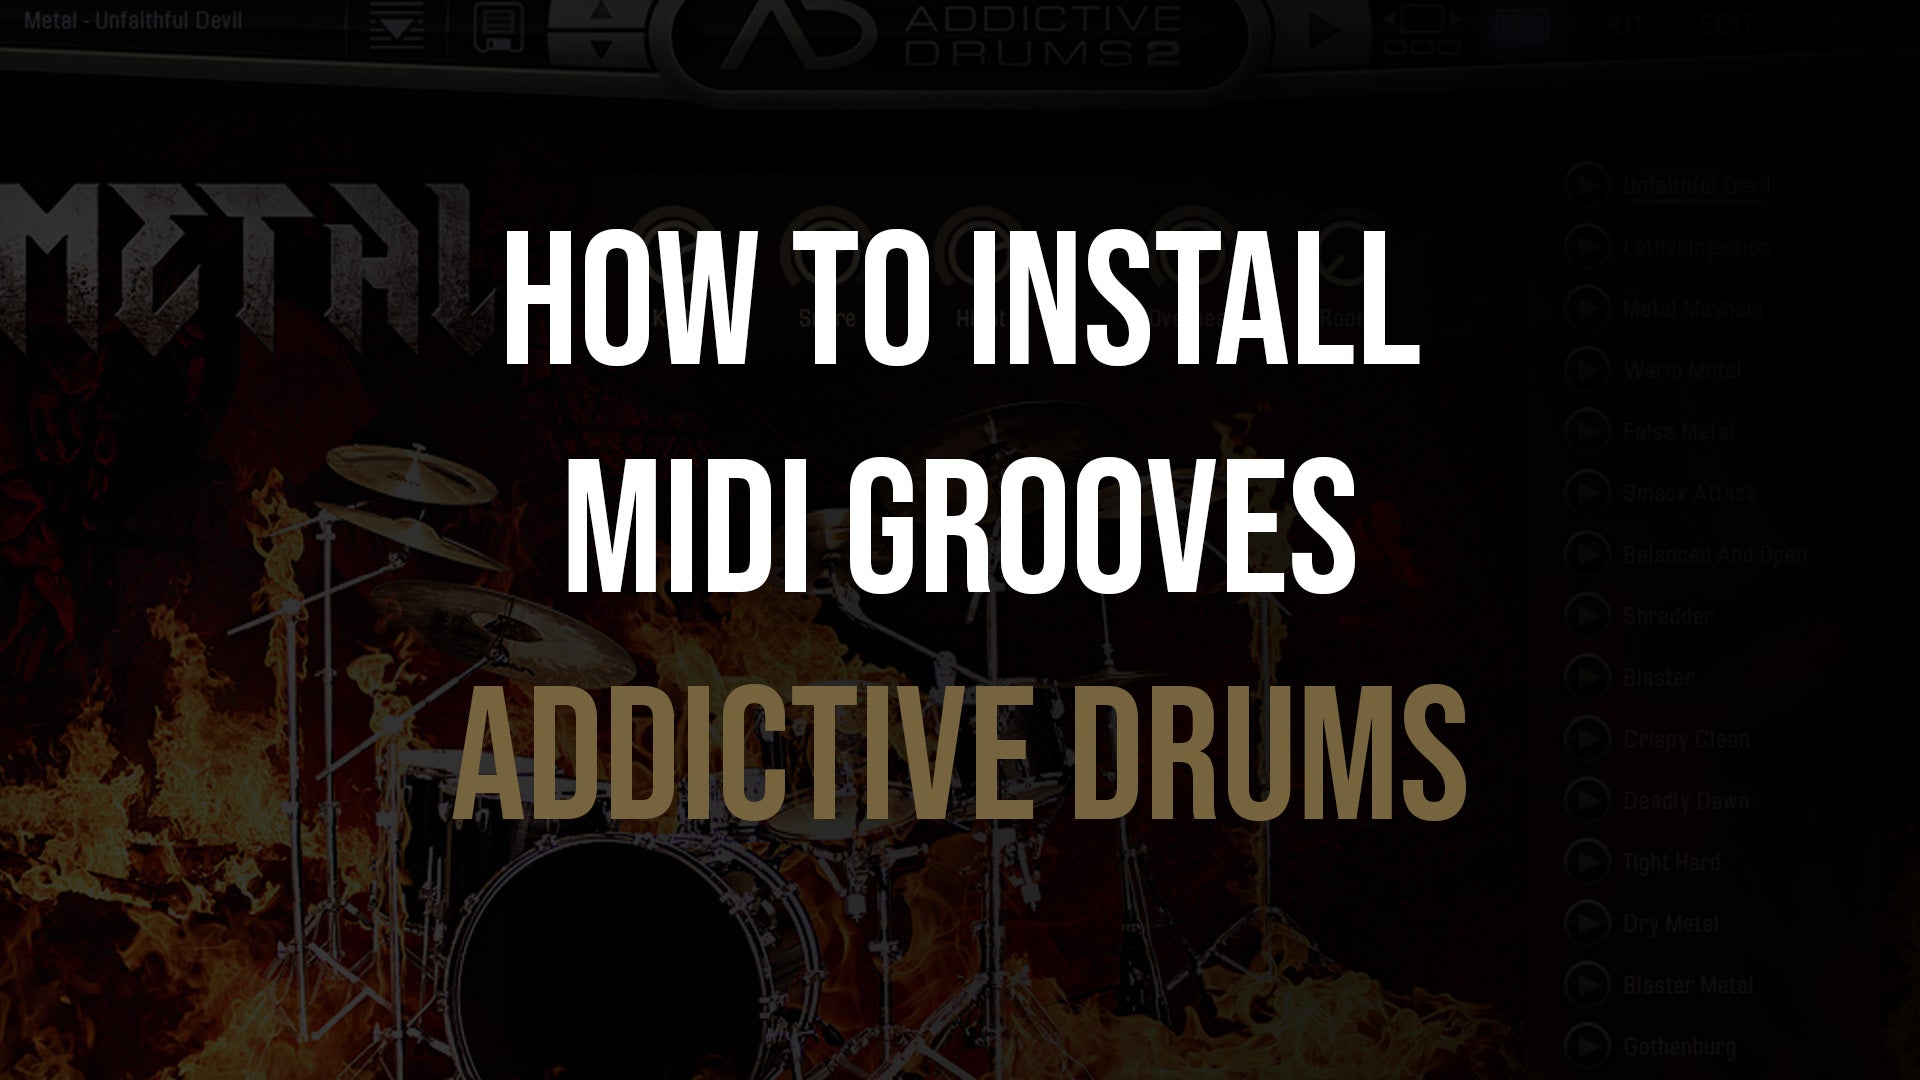 How to install Loudstakk MIDI Grooves into Addictive Drums